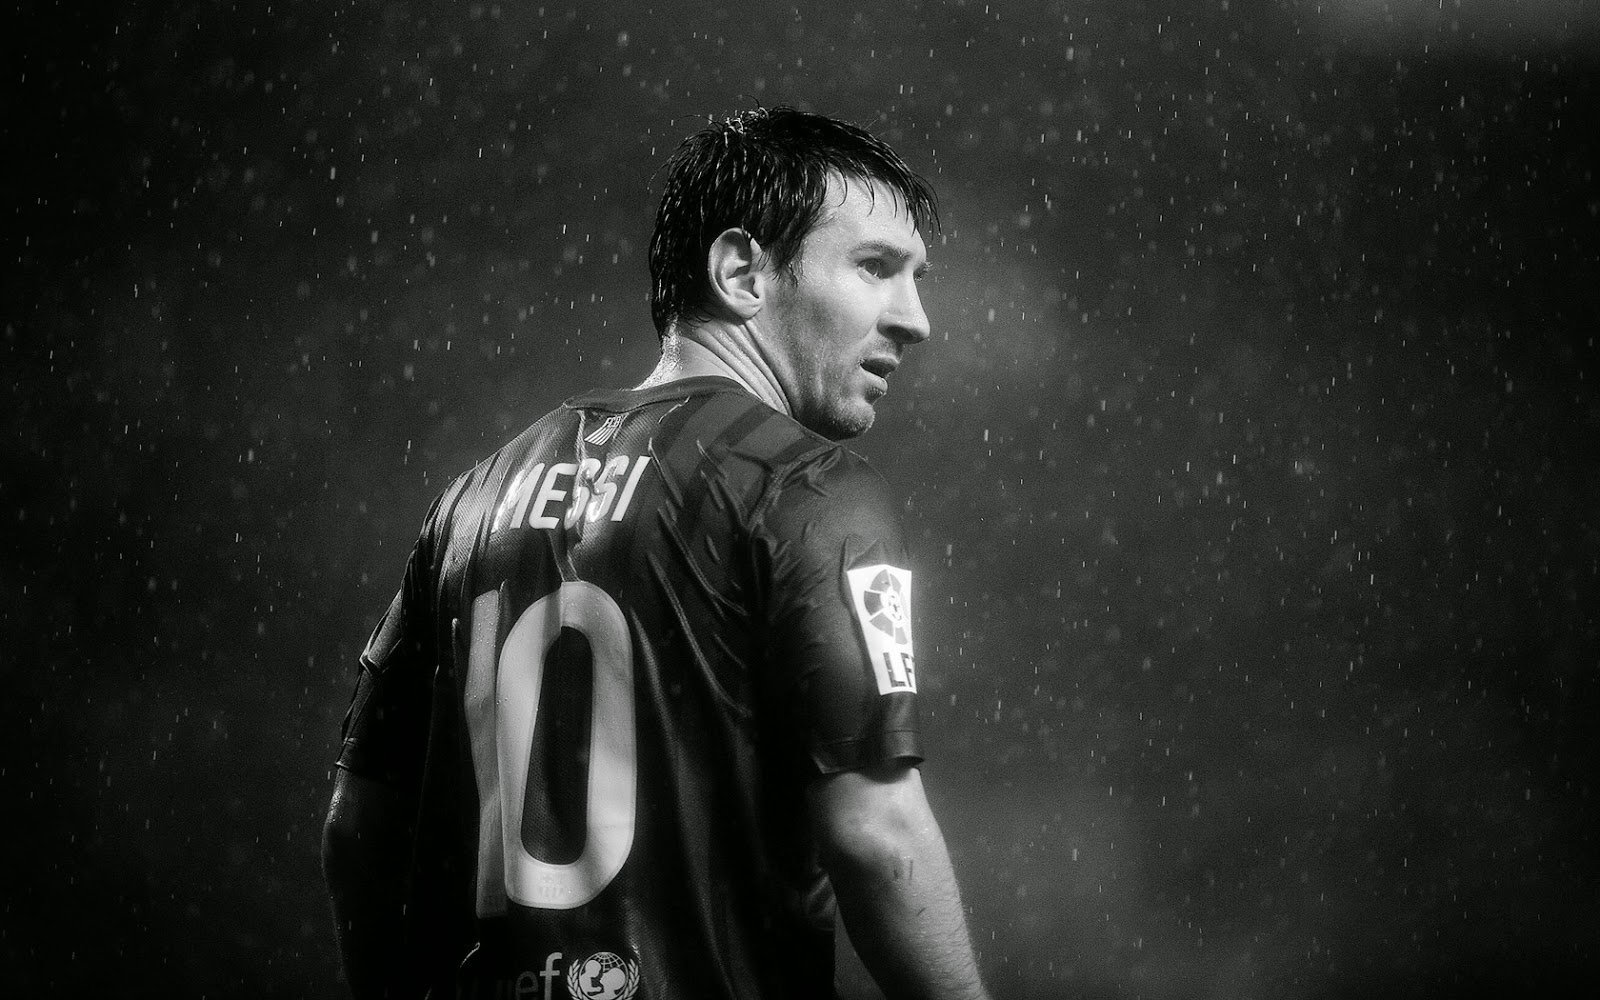 ALL SPORTS PLAYERS Lionel Messi hd Wallpapers 2014 Fifa World Cup